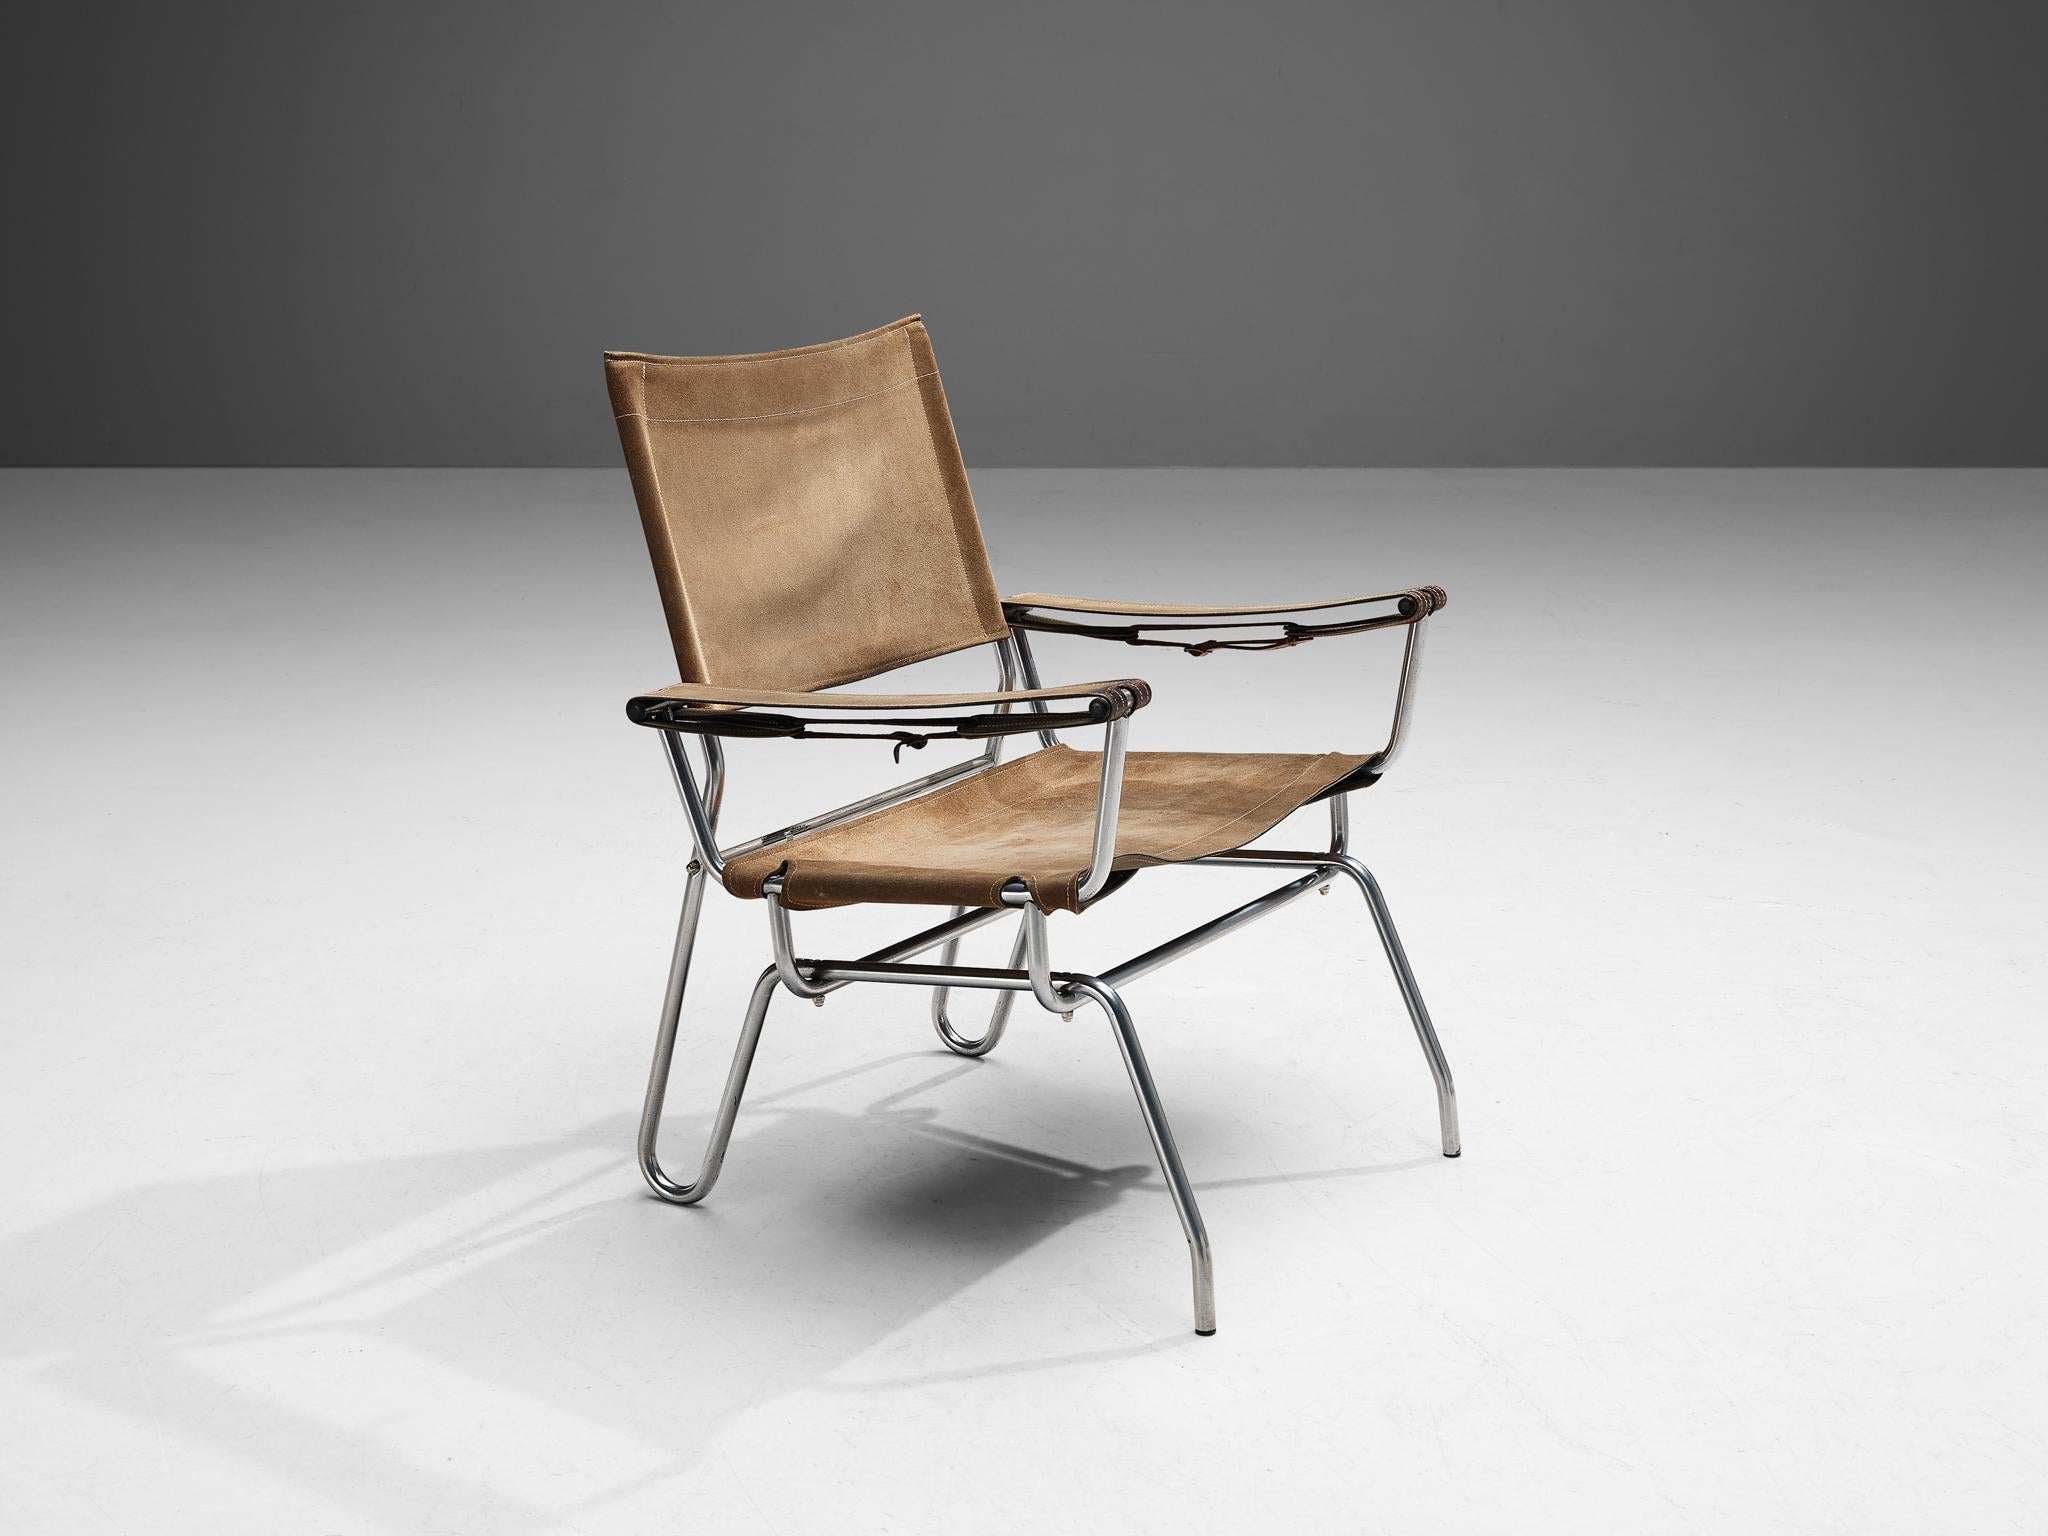 A. Dolleman for Metz & Co, armchair, suede, brass, metal, The Netherlands, 1960 

This rare modernist lounge chair embodies a unique, appealing design. The tubular metal frame is sleek and is beautifully bent into shape. The seat and backseat are